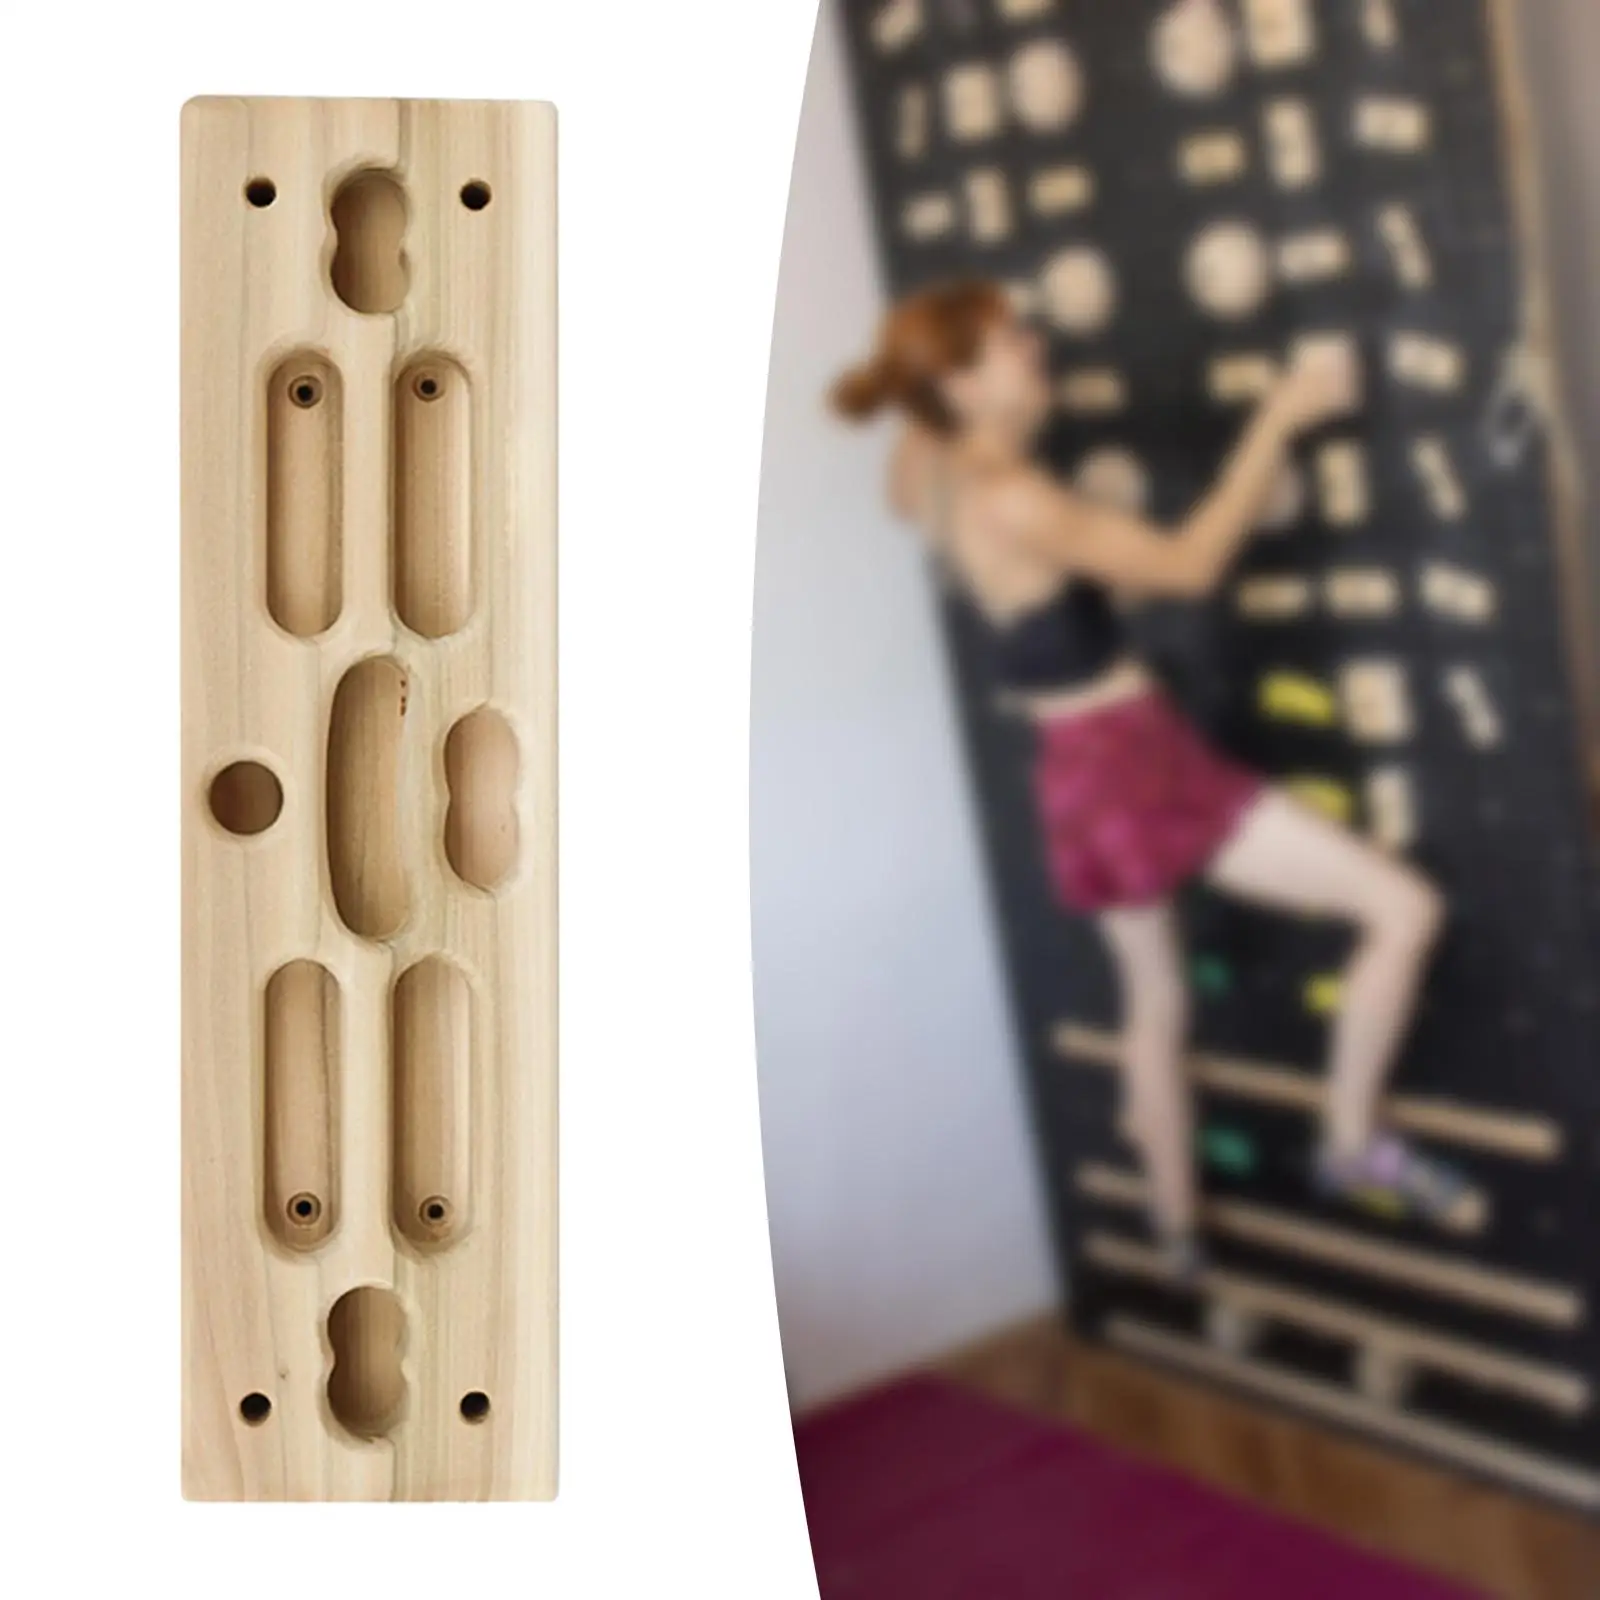 Climbing Hangboard Training Aid Hang Board for Athletes Climbers Bouldering